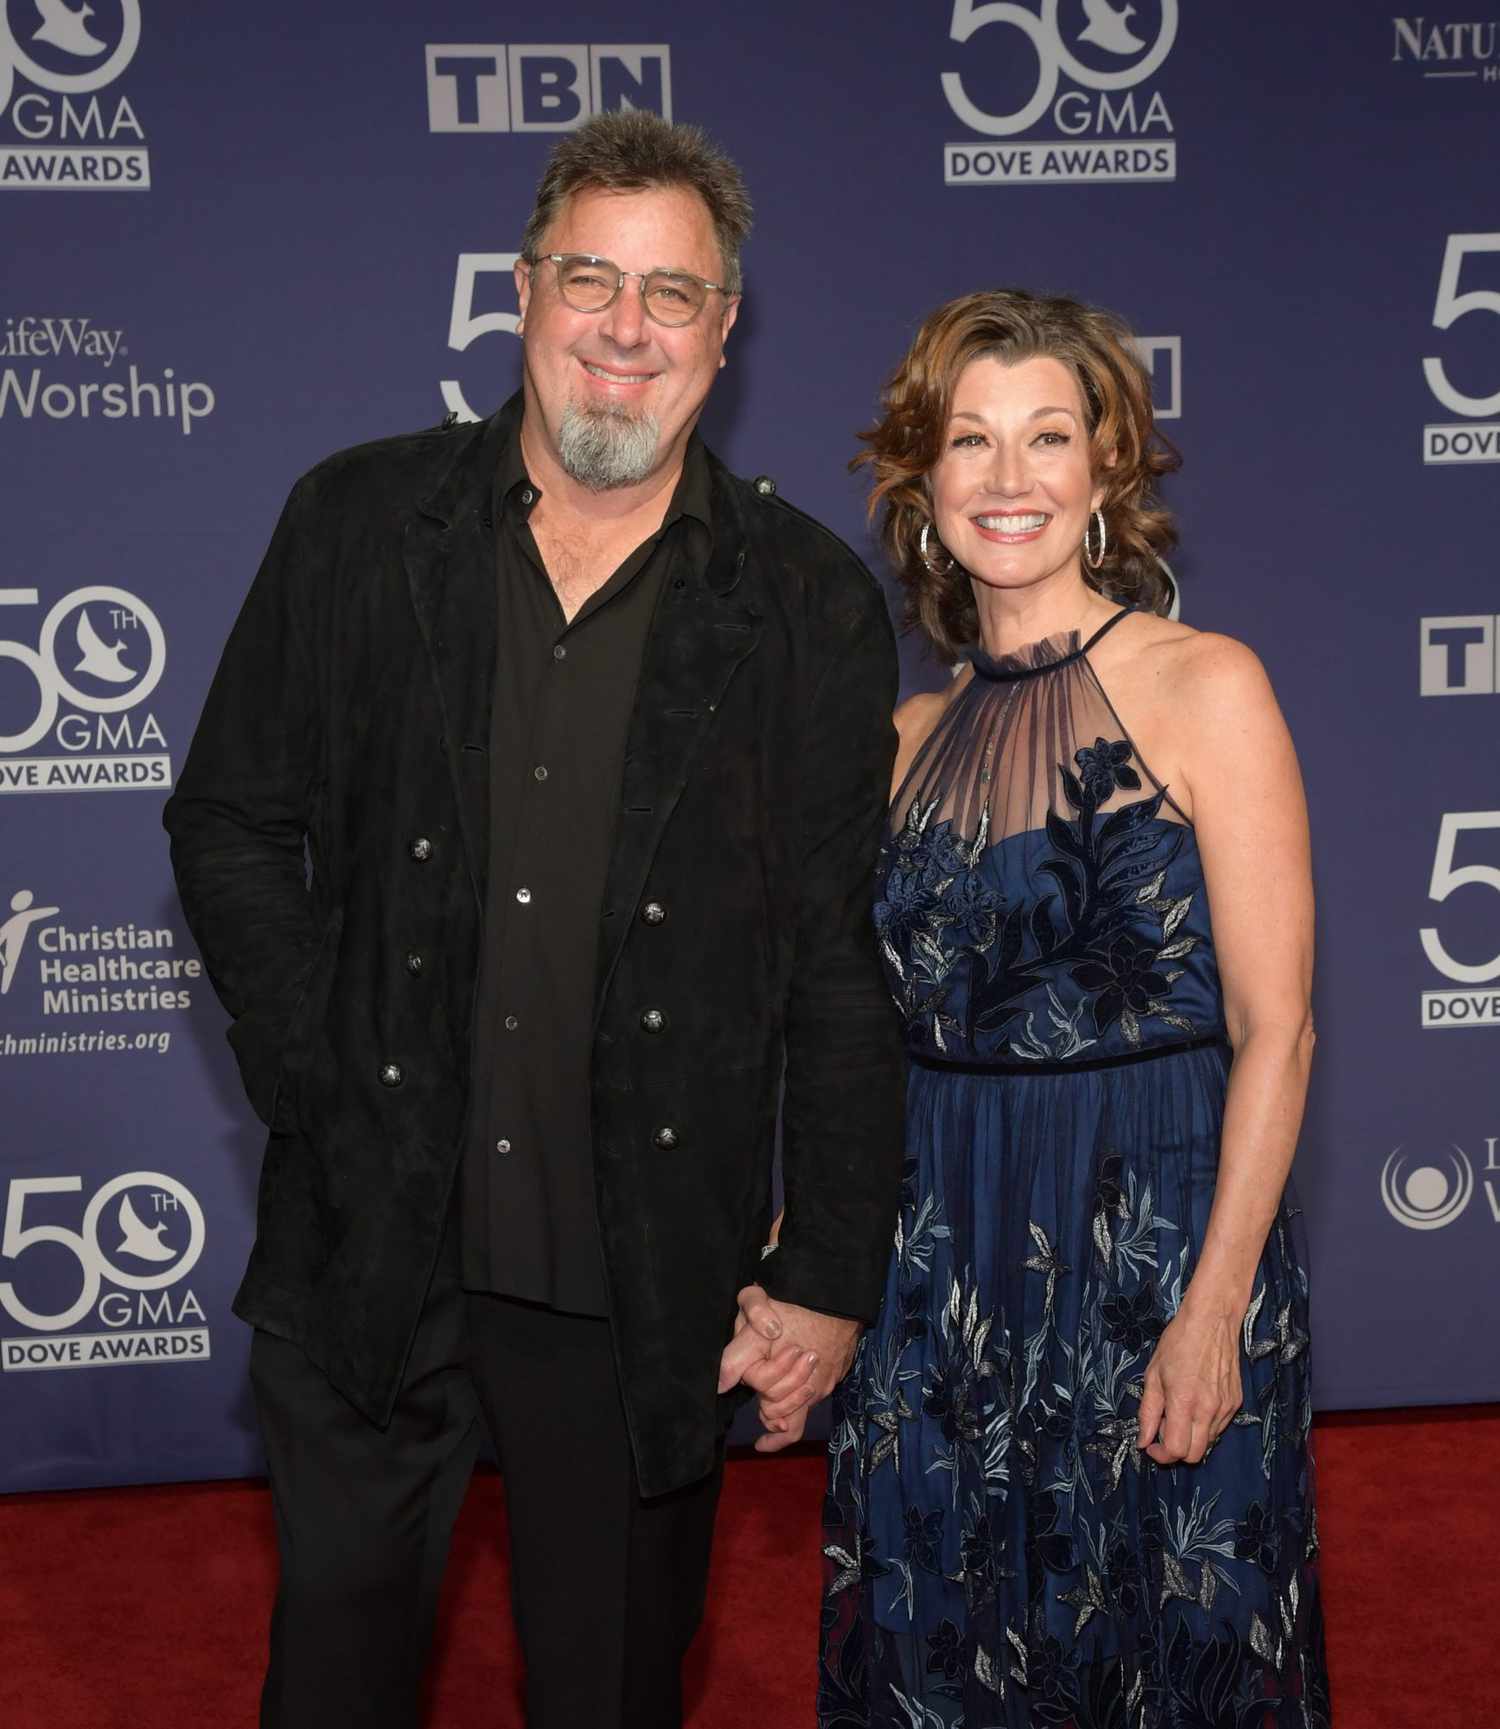 Vince Gill with Amy Grant